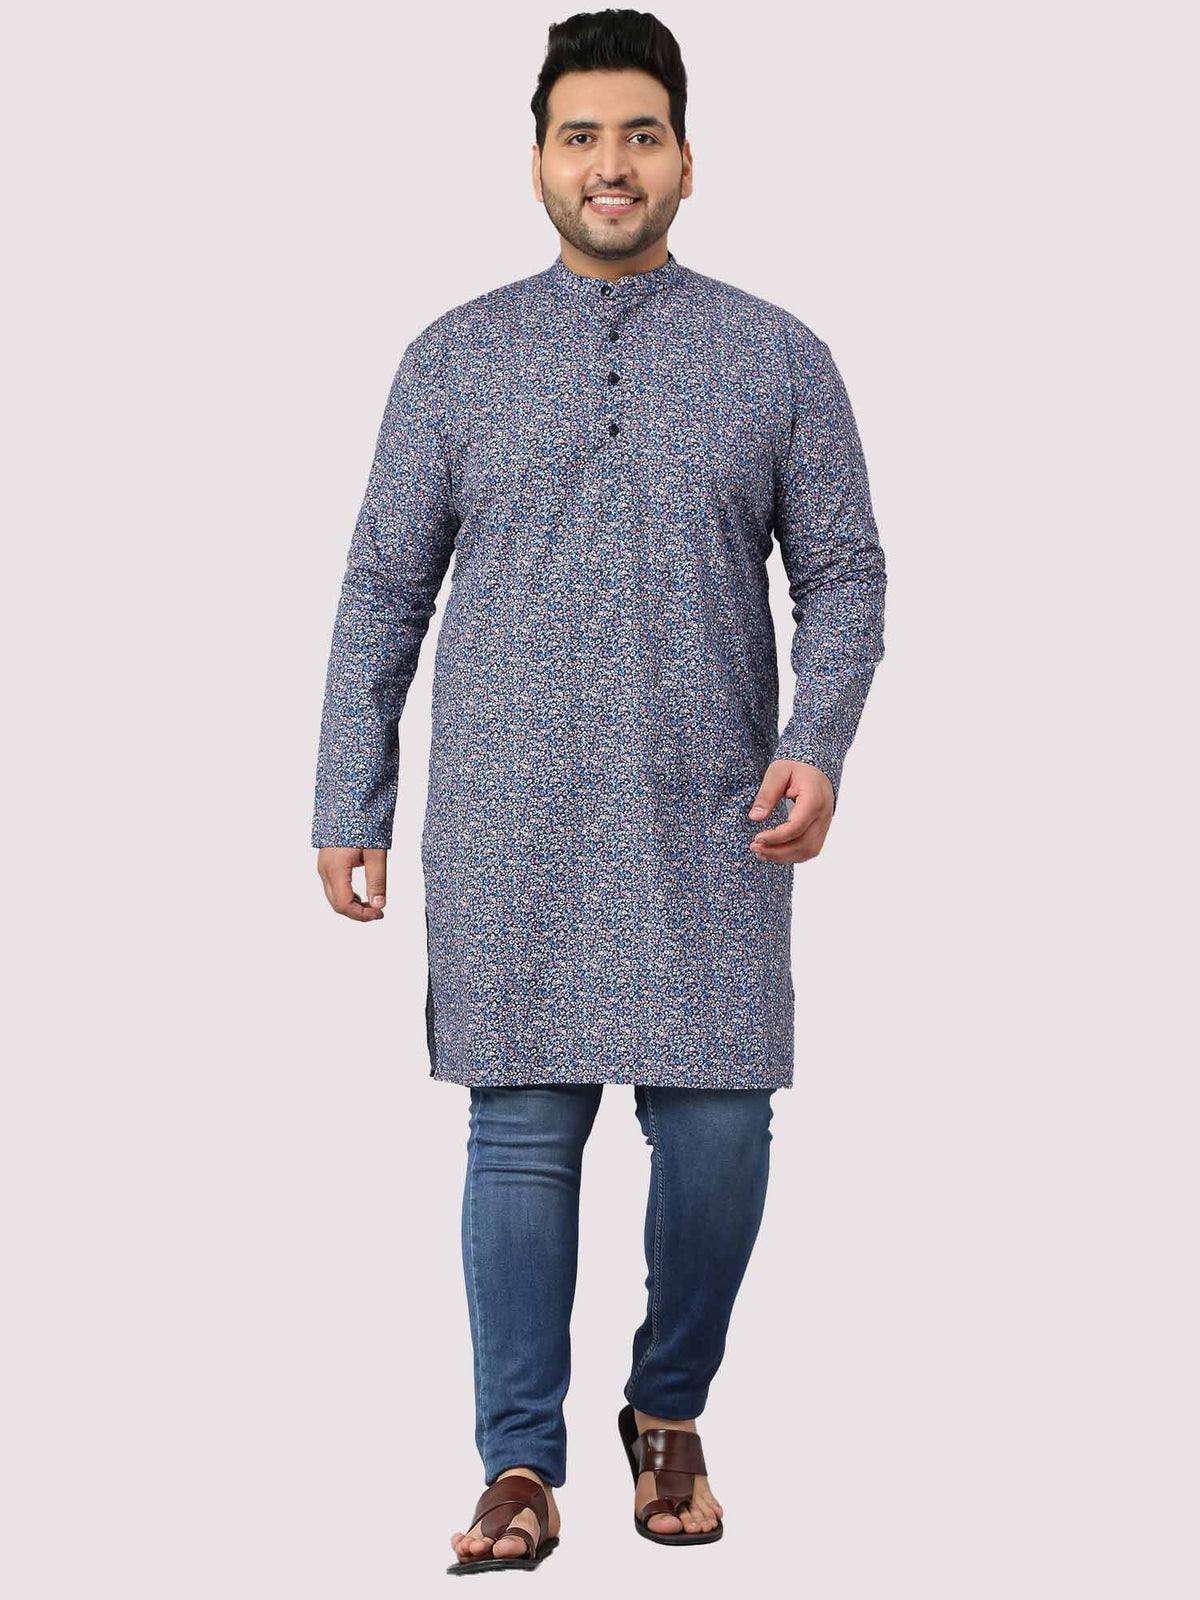 Out Of The Blue Abstraction Print Kurta Men's Plus Size - Guniaa Fashions